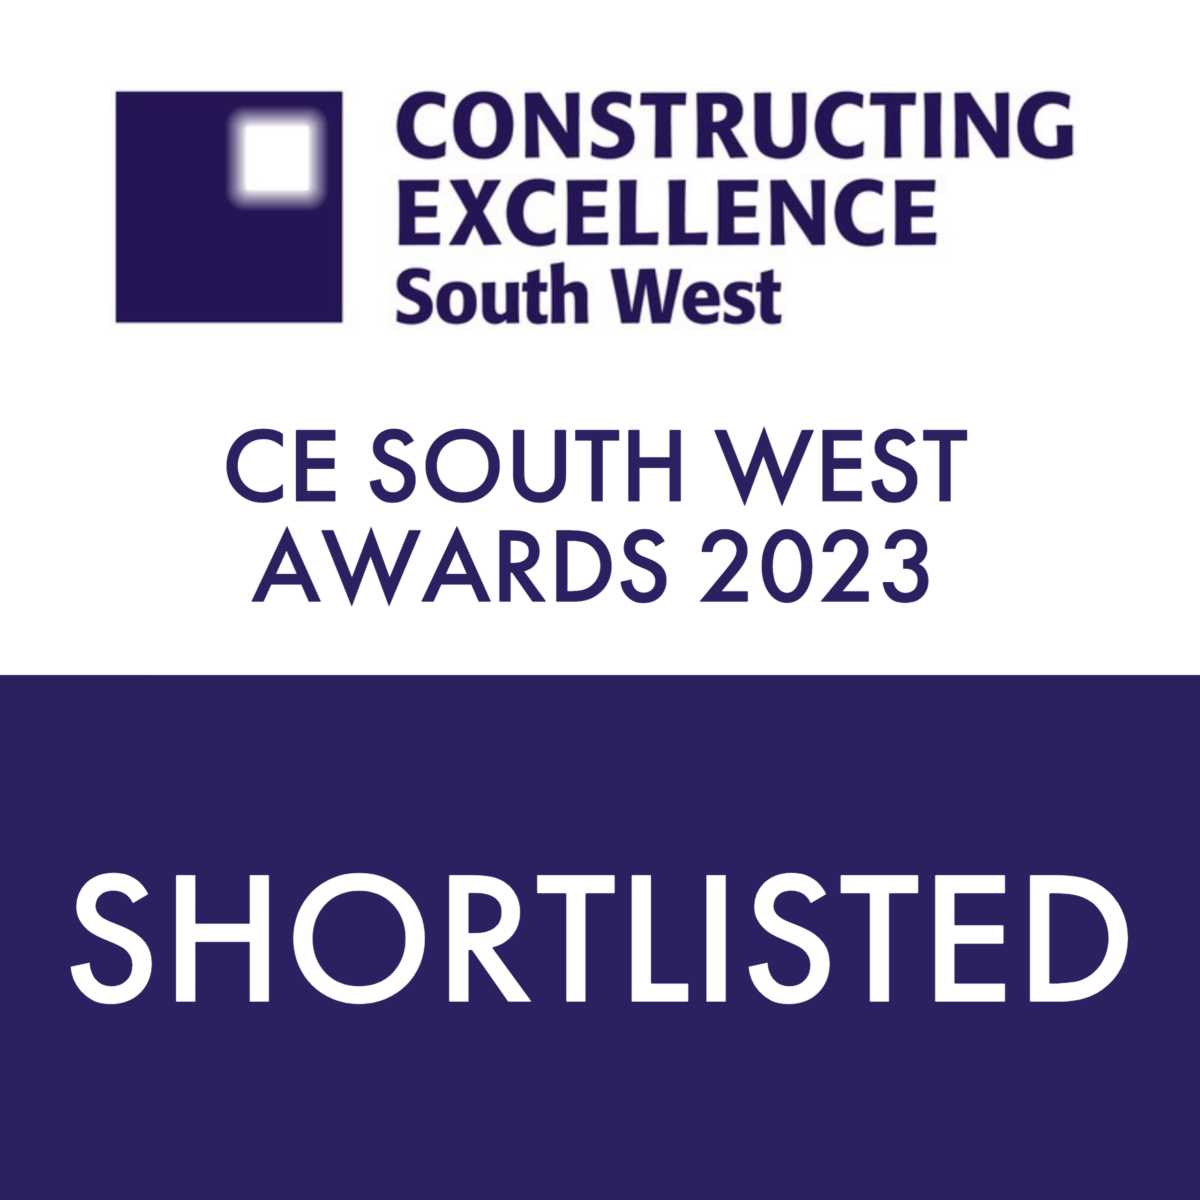 Shortlisted for two CESW Awards